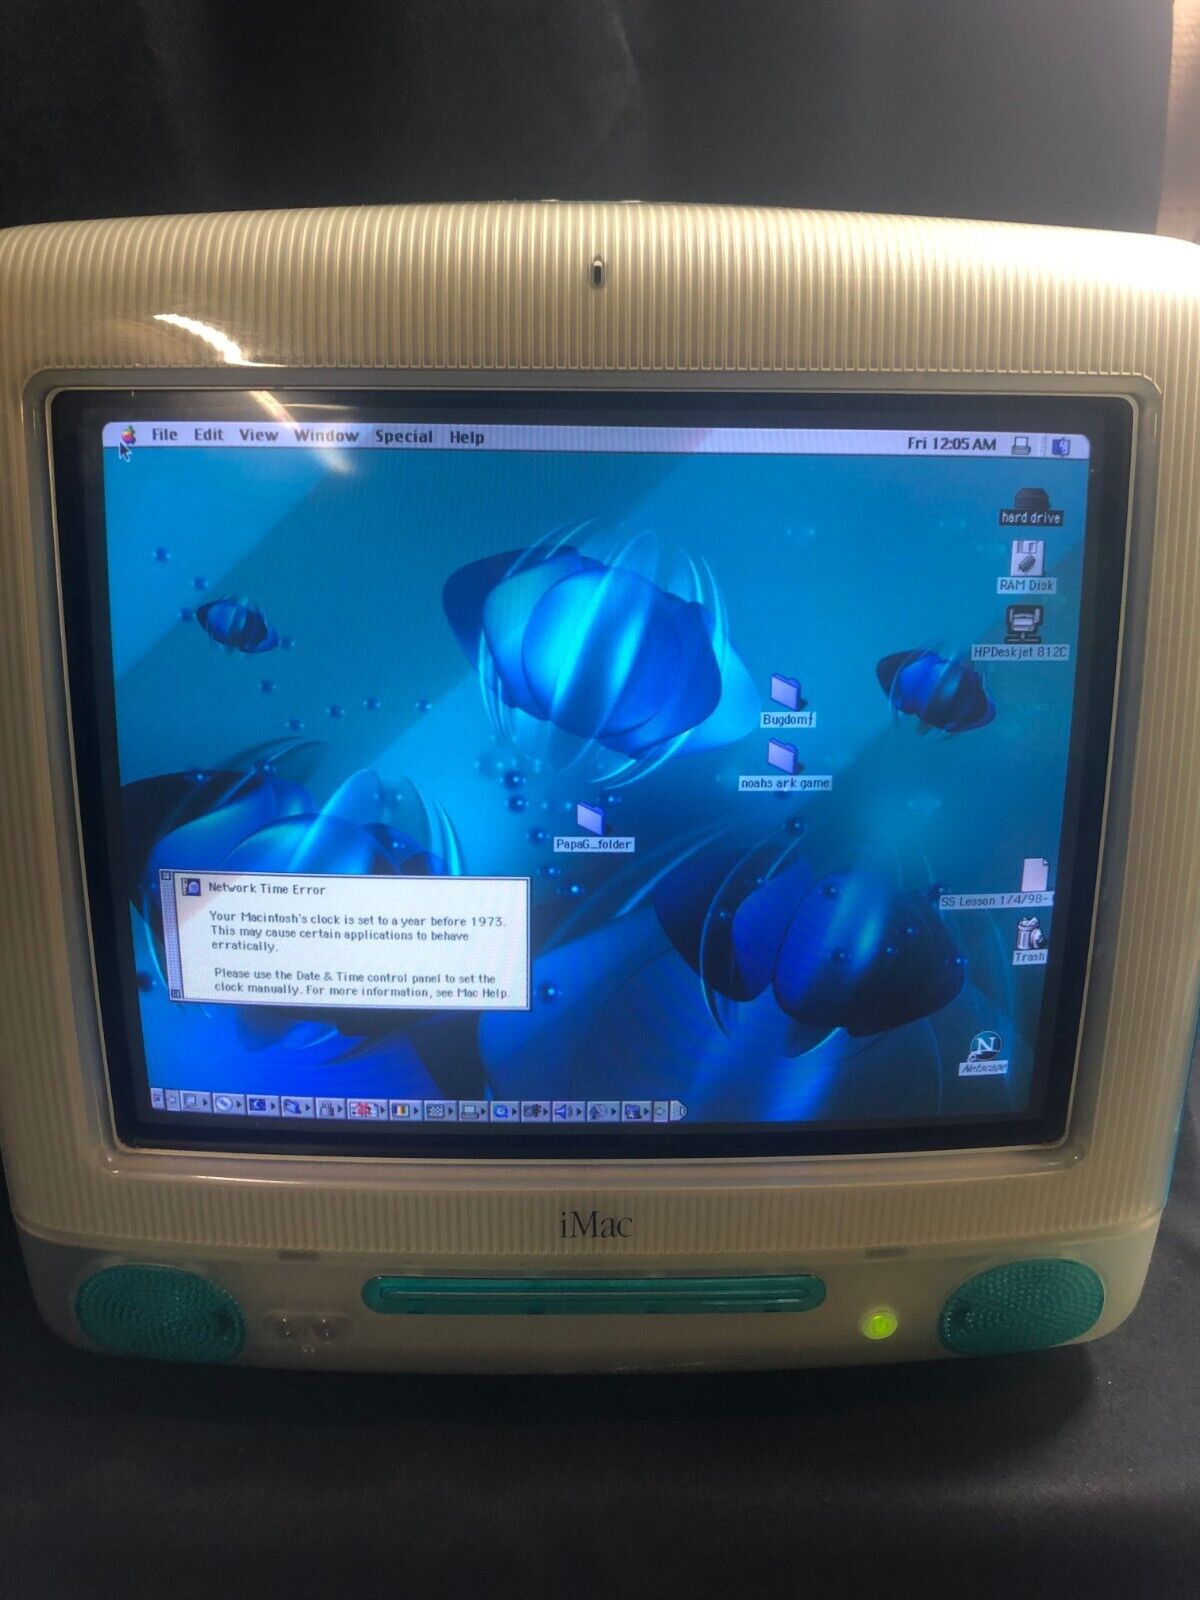 Apple iMac G3 Retro Vintage Computer Model M5521 Working-No shipping/Only local